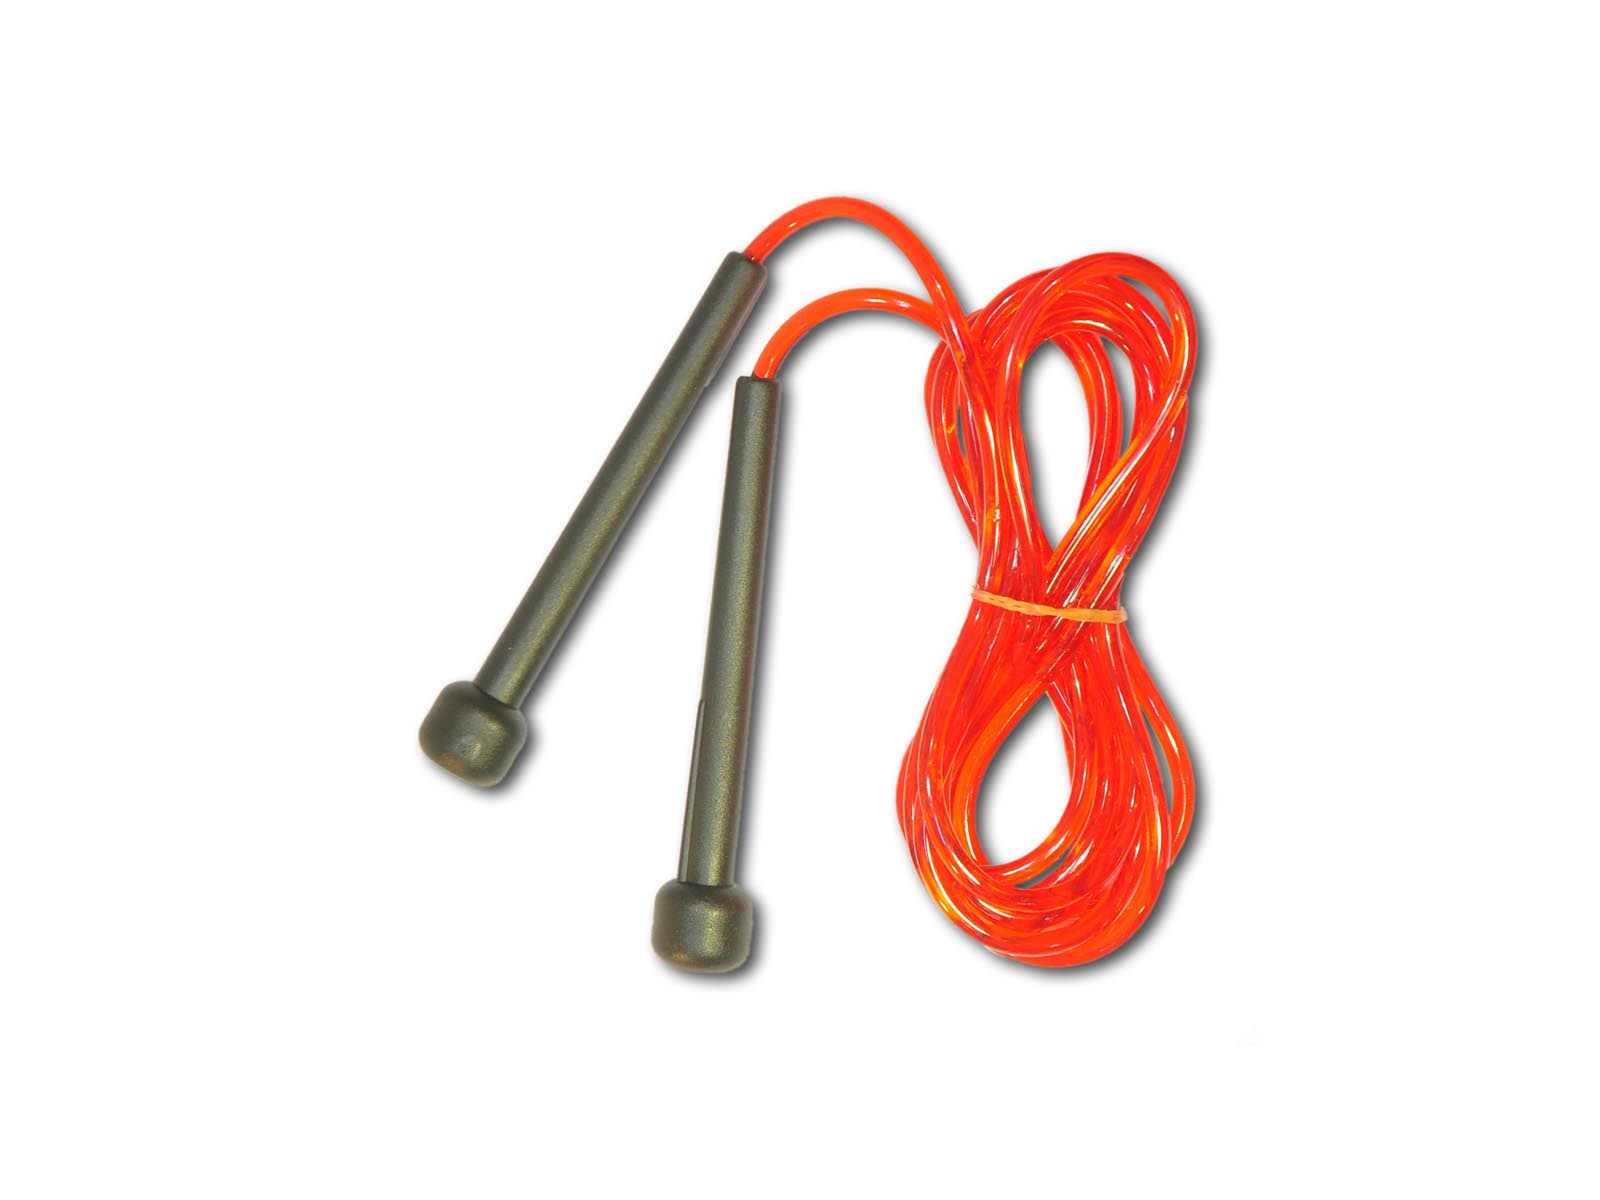 Skip rope with handles